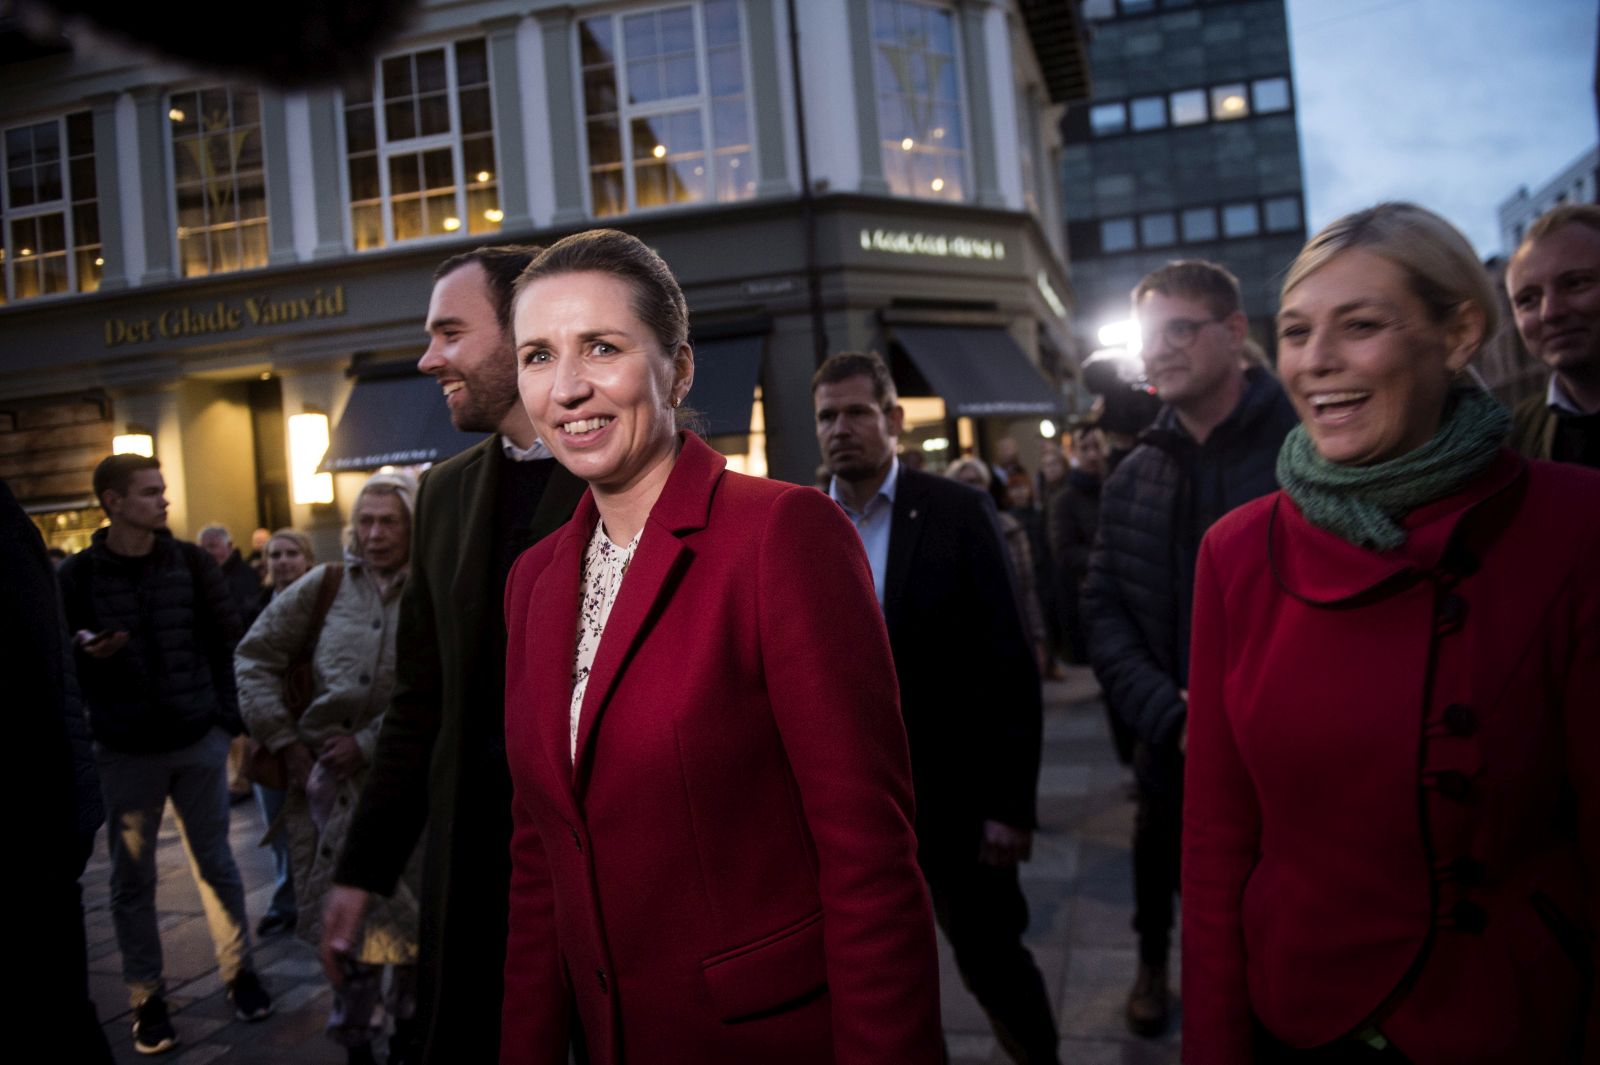 epa10279344 Danish Prime Minister and chairman of the Social Democratic Party Mette Frederiksen and Trine Bramsen during the election campaign in Odense, Denmark, 01 November 2022. General elections are underway in Denmark.  EPA/TIM KILDEBORG JENSEN  DENMARK OUT